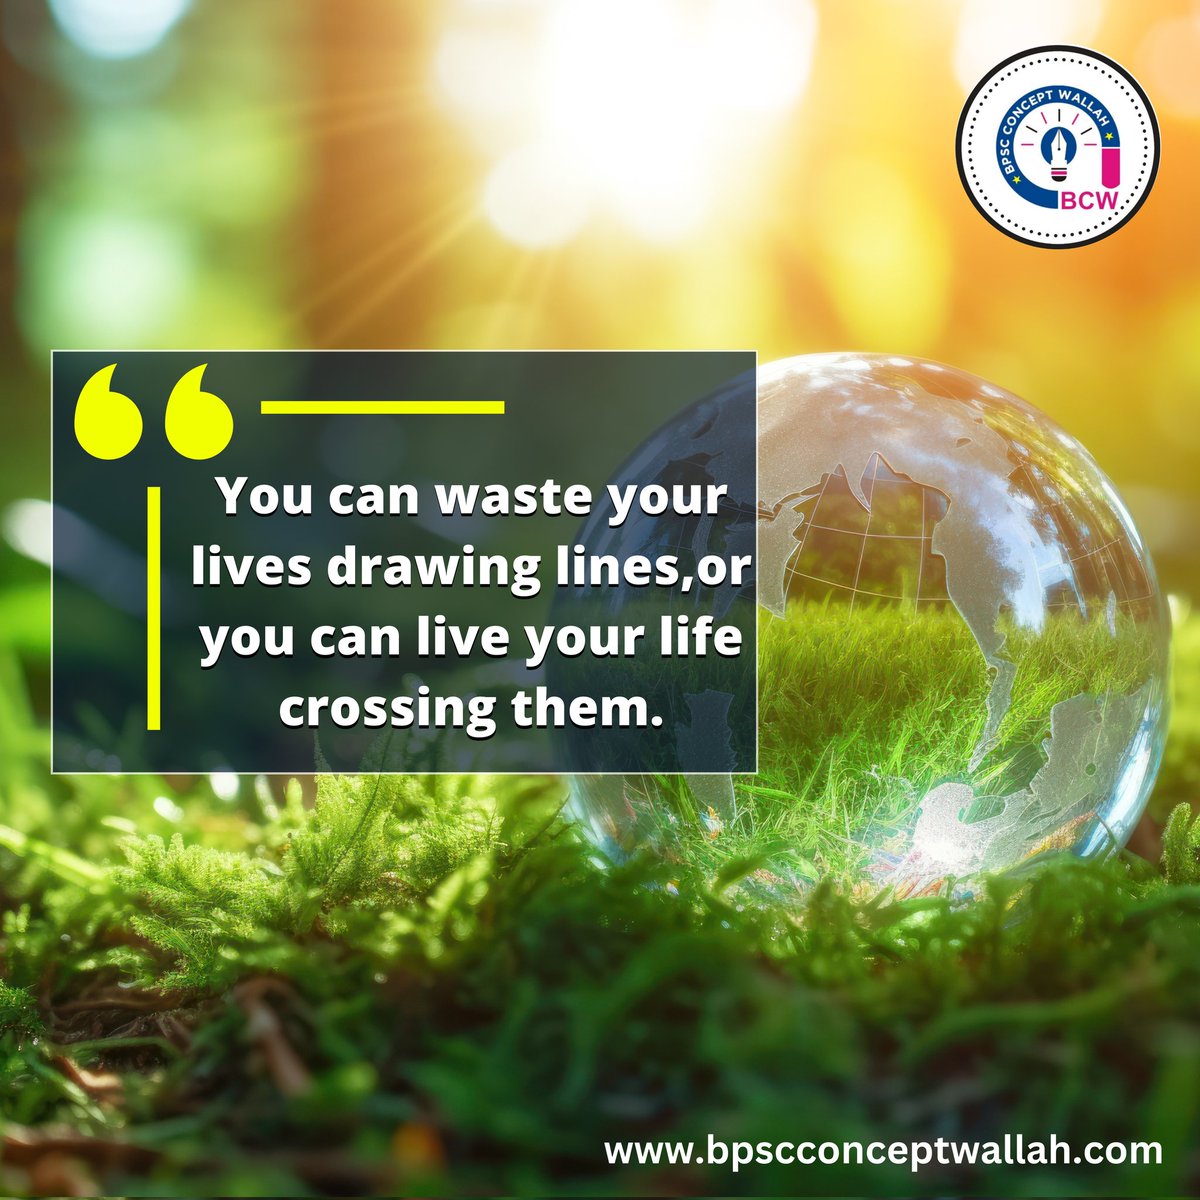 ✅ You can waste your lives drawing lines. Or you can live your life crossing them.” 
#bpscconceptwallah #70thbpsc